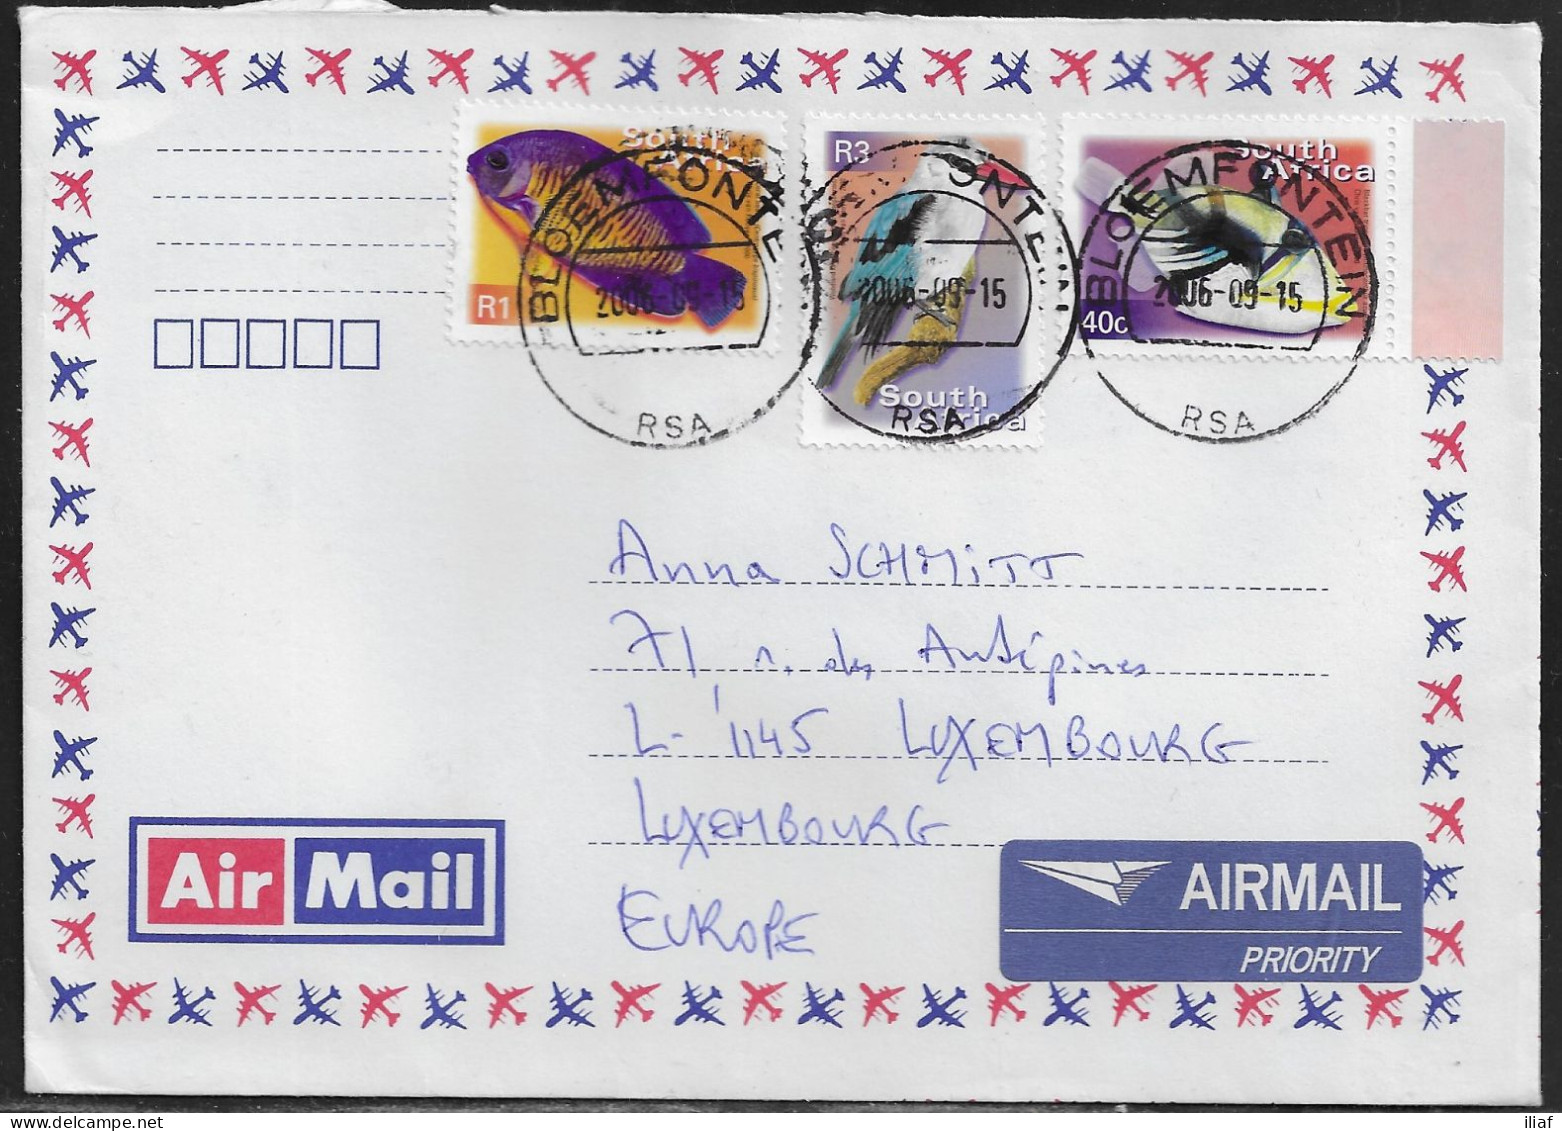 South Africa. Stamps Sc. 1177, 1183, 1194 On Air Mail Letter, Sent From South Africa At 15.09.2006 To Luxembourg. - Storia Postale